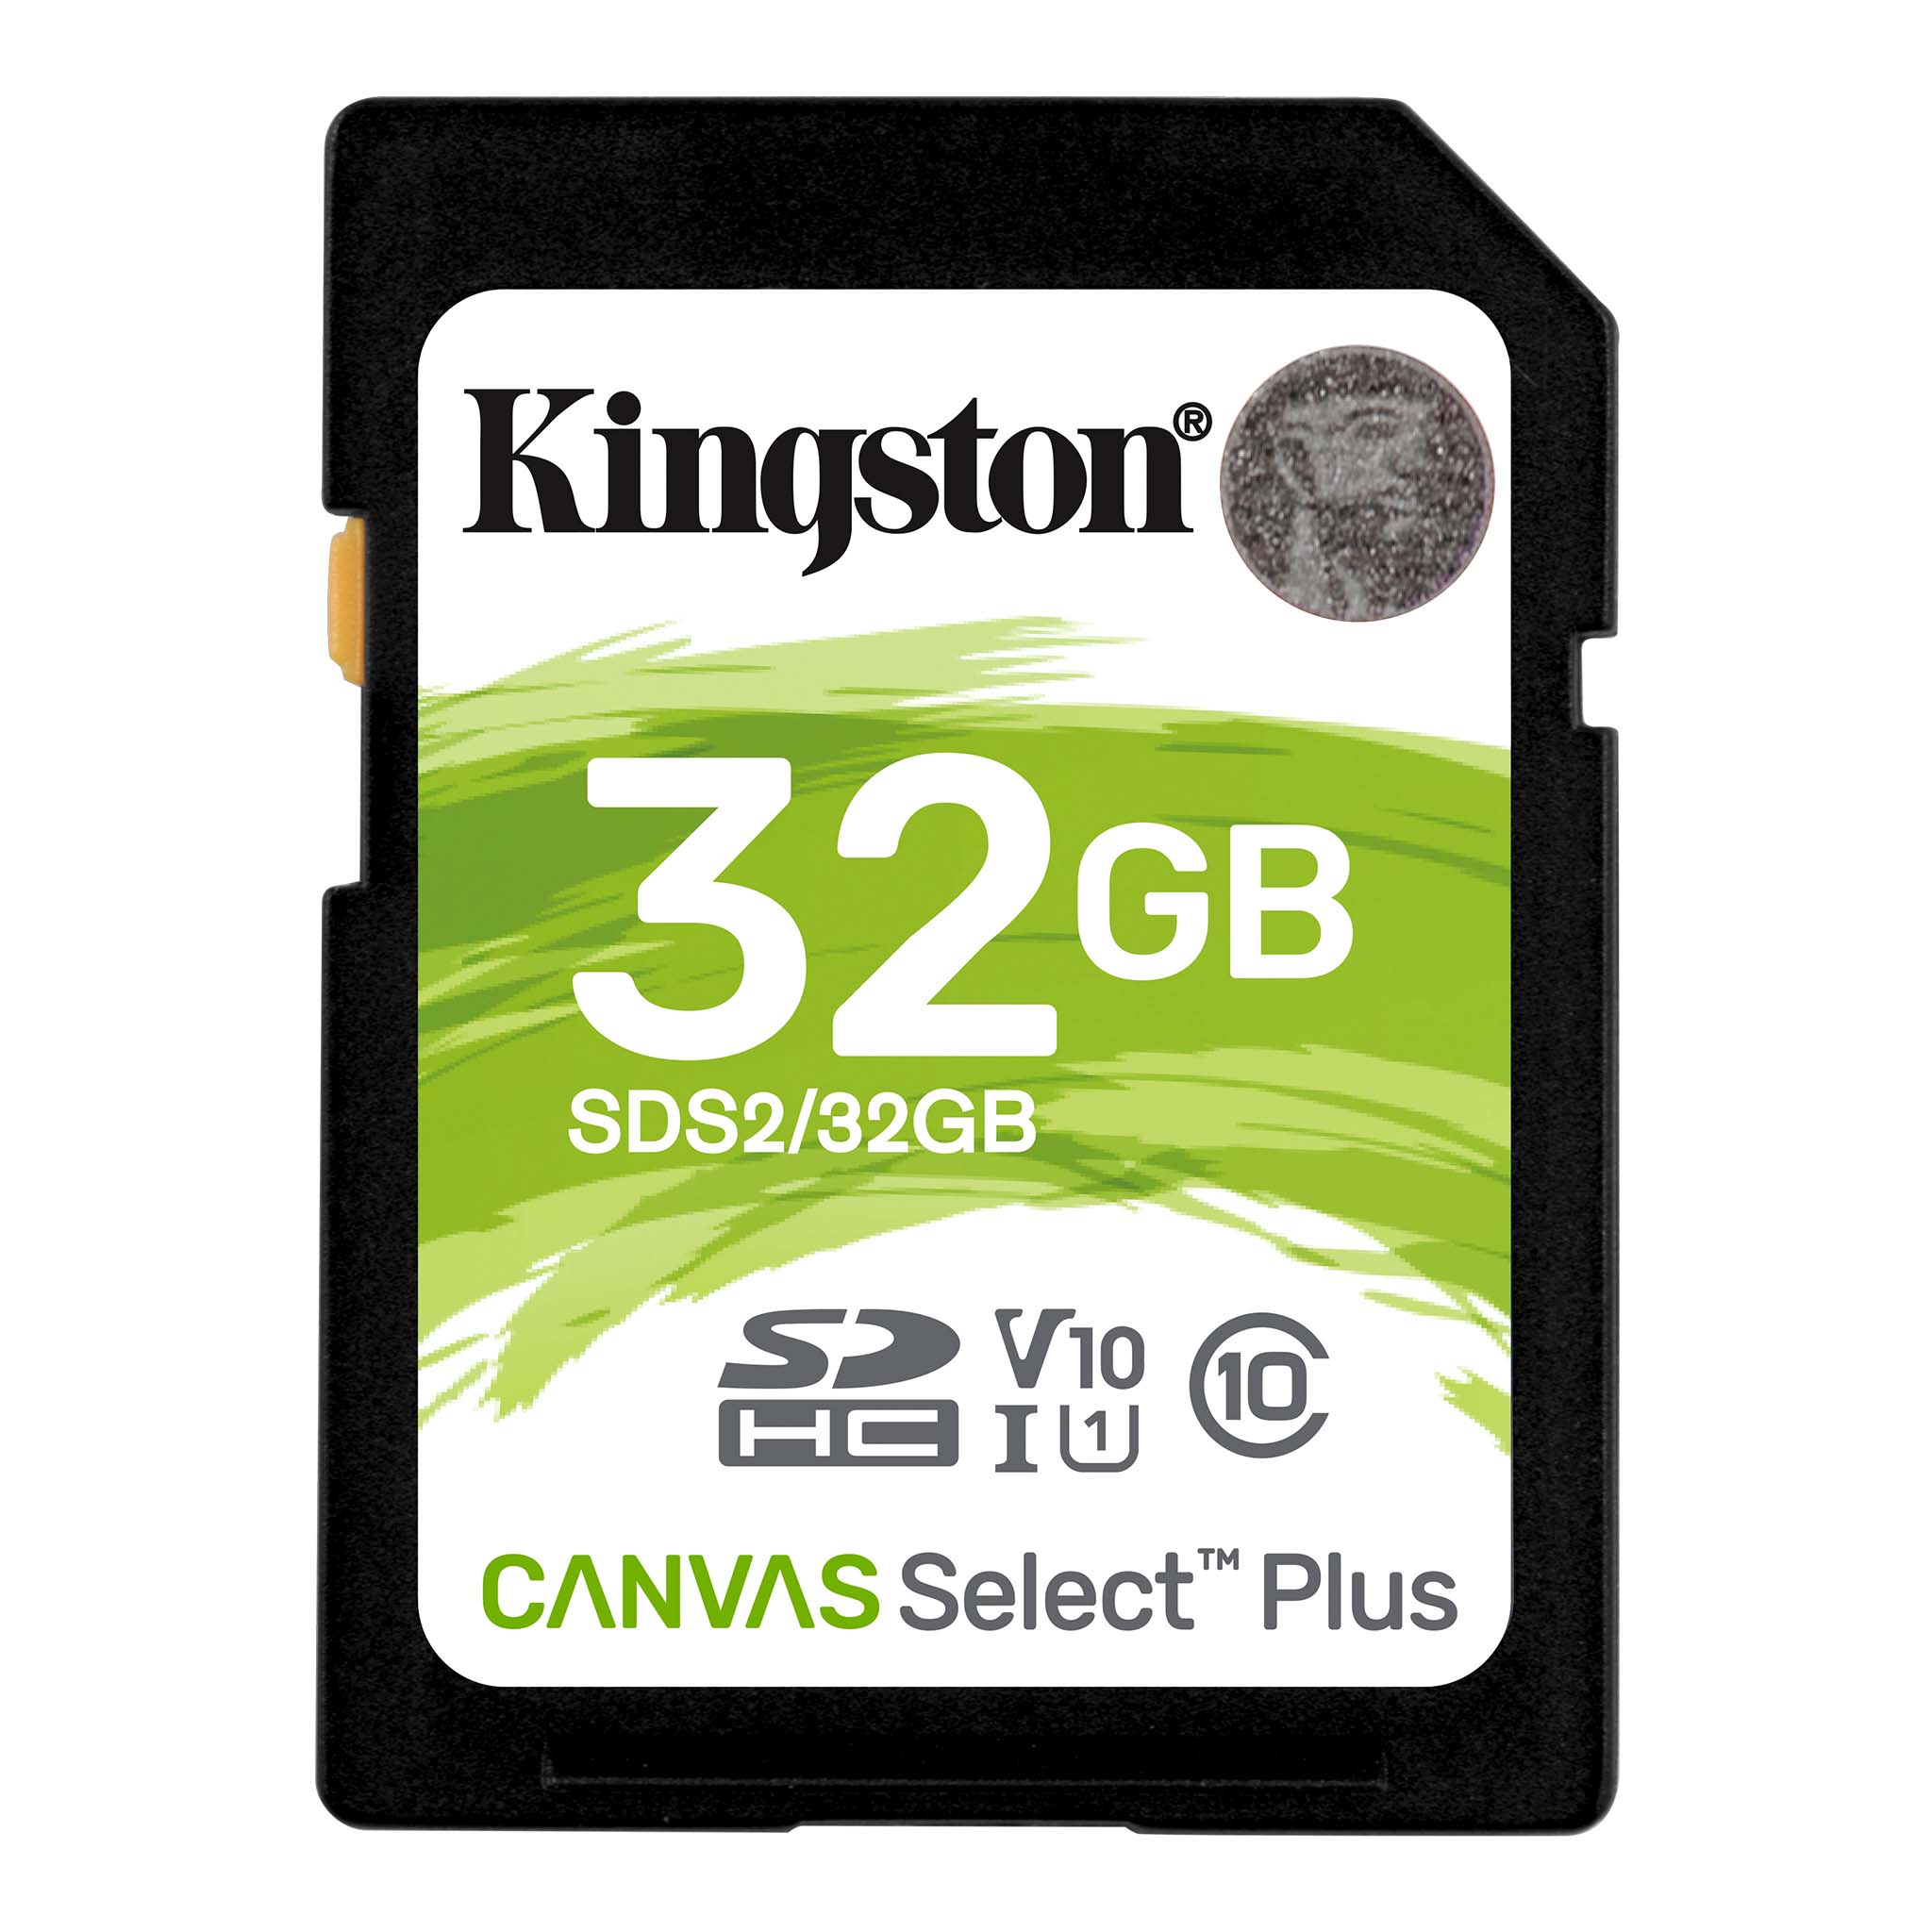 Kingston 32GB Canon VIXIA HF R500 Black MicroSDHC Canvas Select Plus Card Verified by SanFlash. 100MBs Works with Kingston 